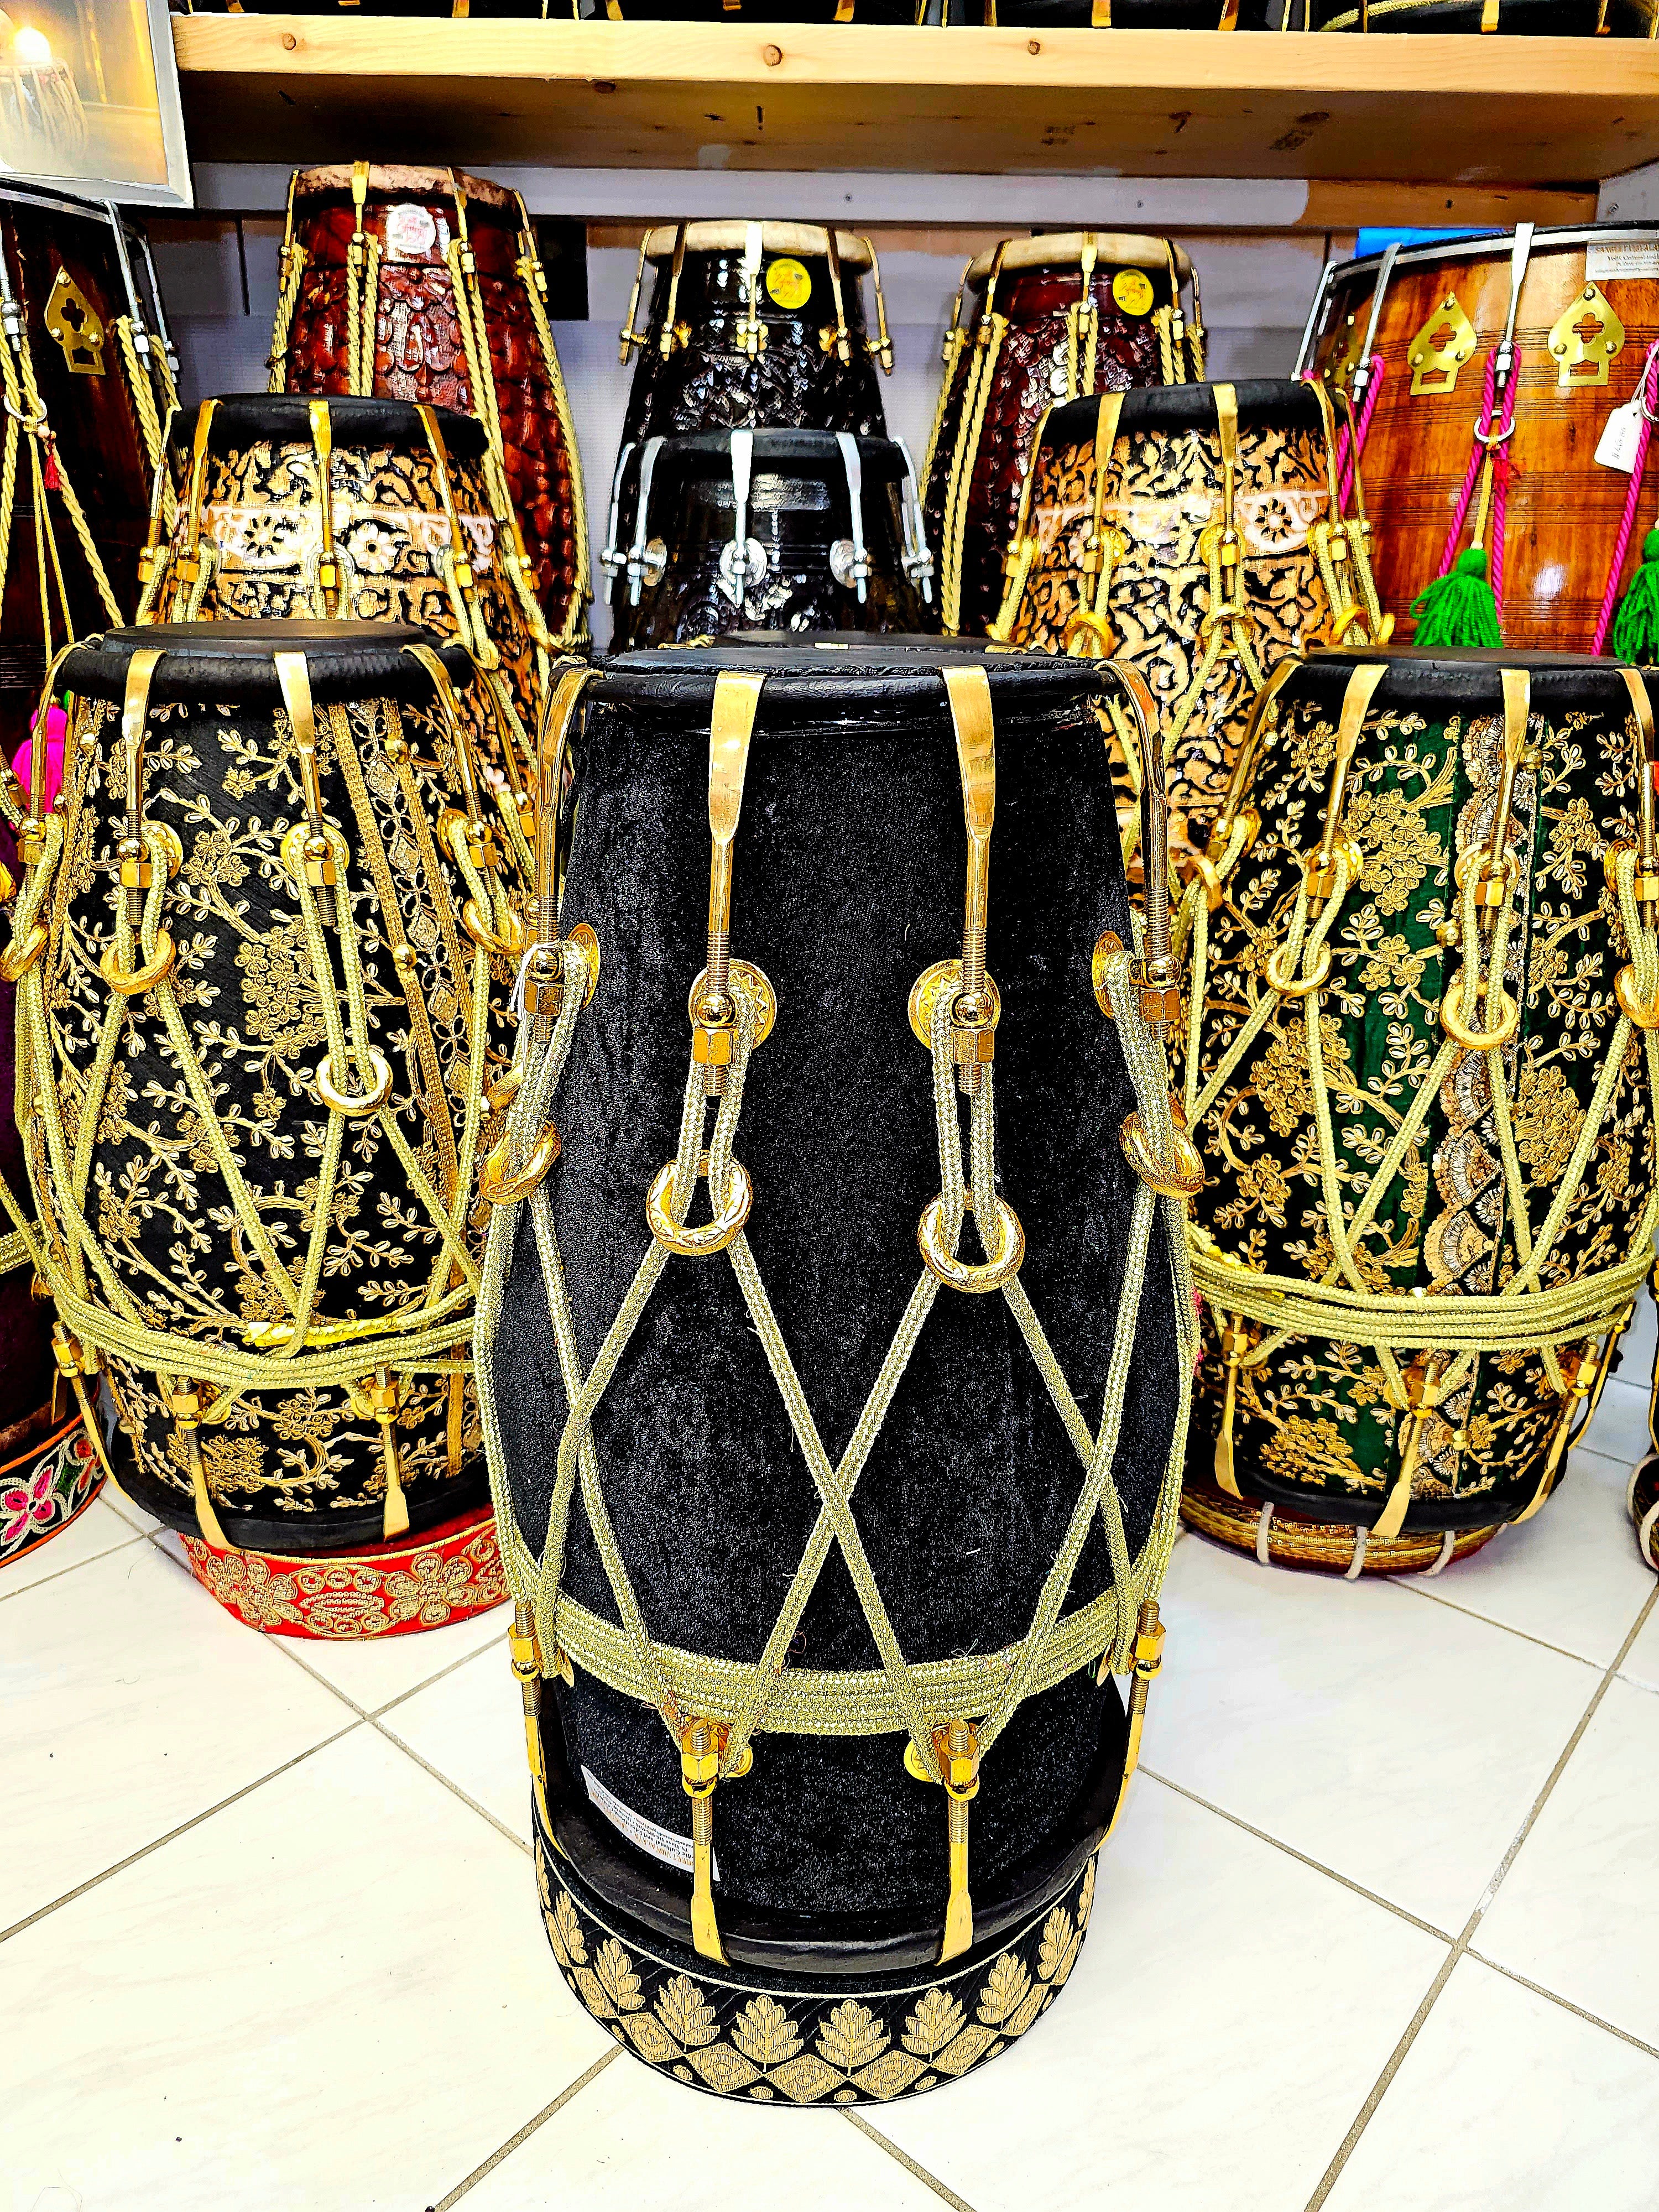 Obsidian Echo™ Velvet-Wrapped Red Sheesham Dholak with Minor Skin Discoloration (BLACK FRIDAY SALE!)